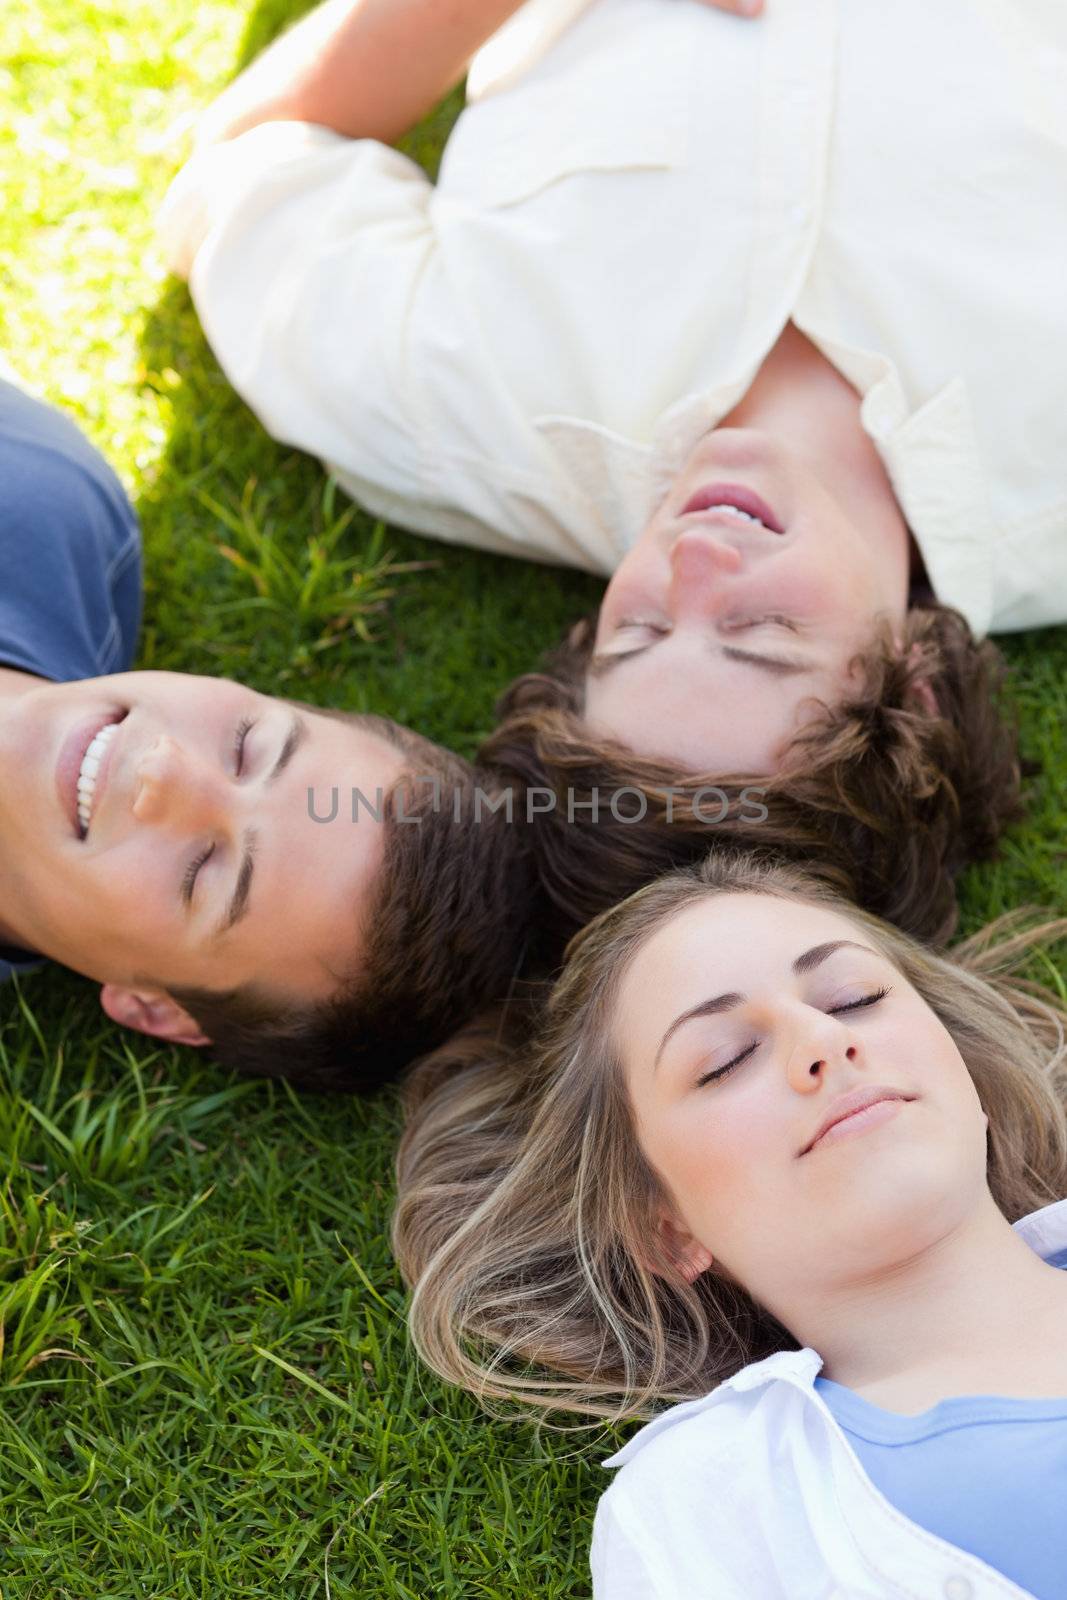 Three happy students resting together in the grass